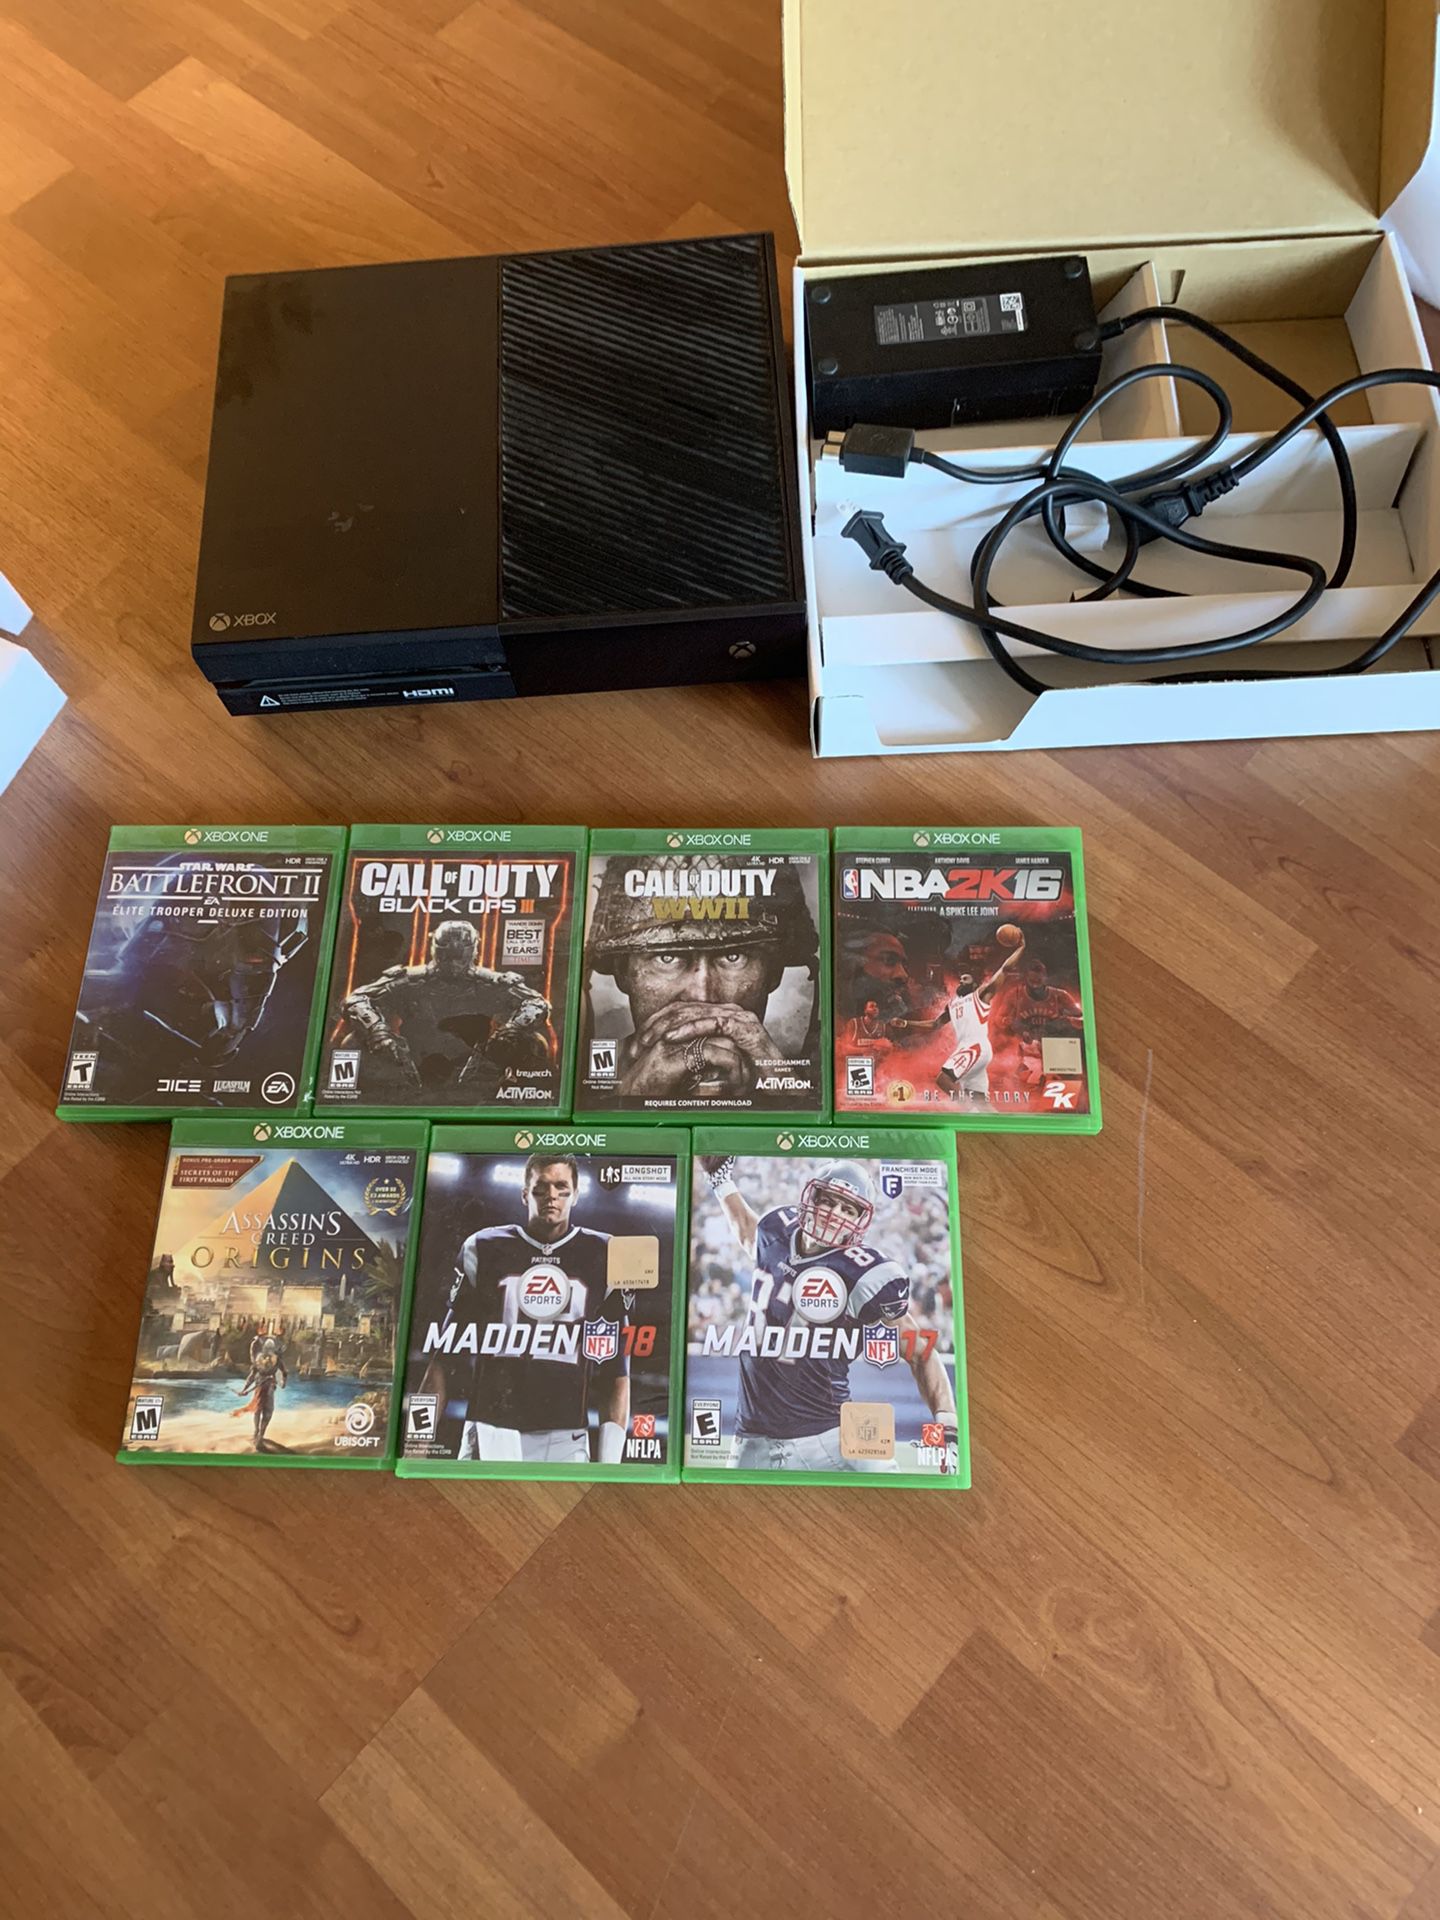 Original Xbox One with brick power pack and games